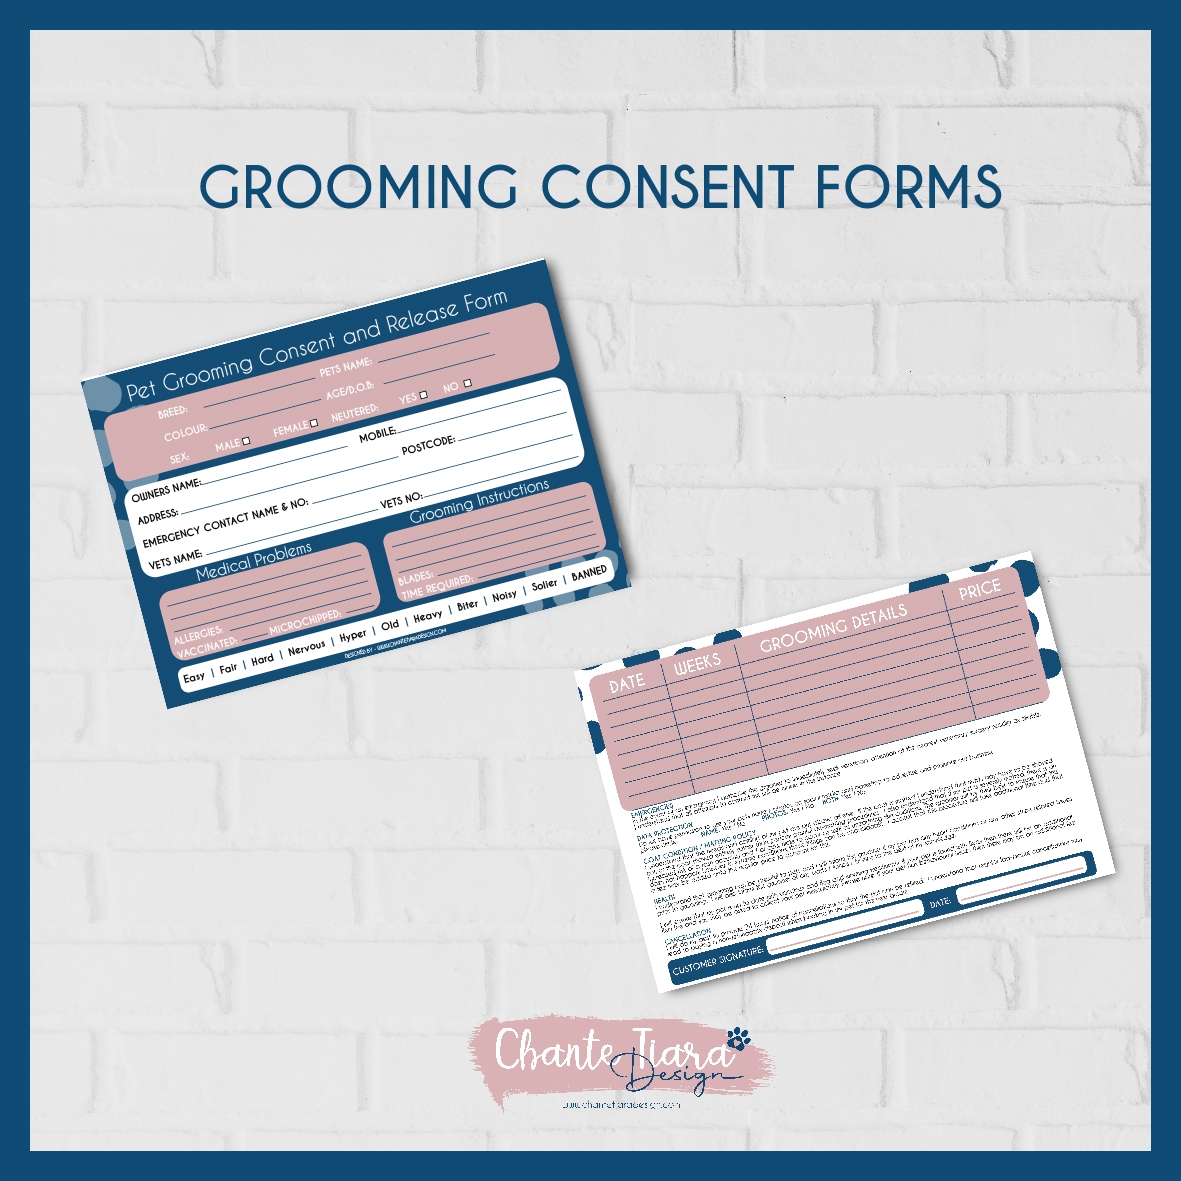 GROOMING CONSENT FORMS